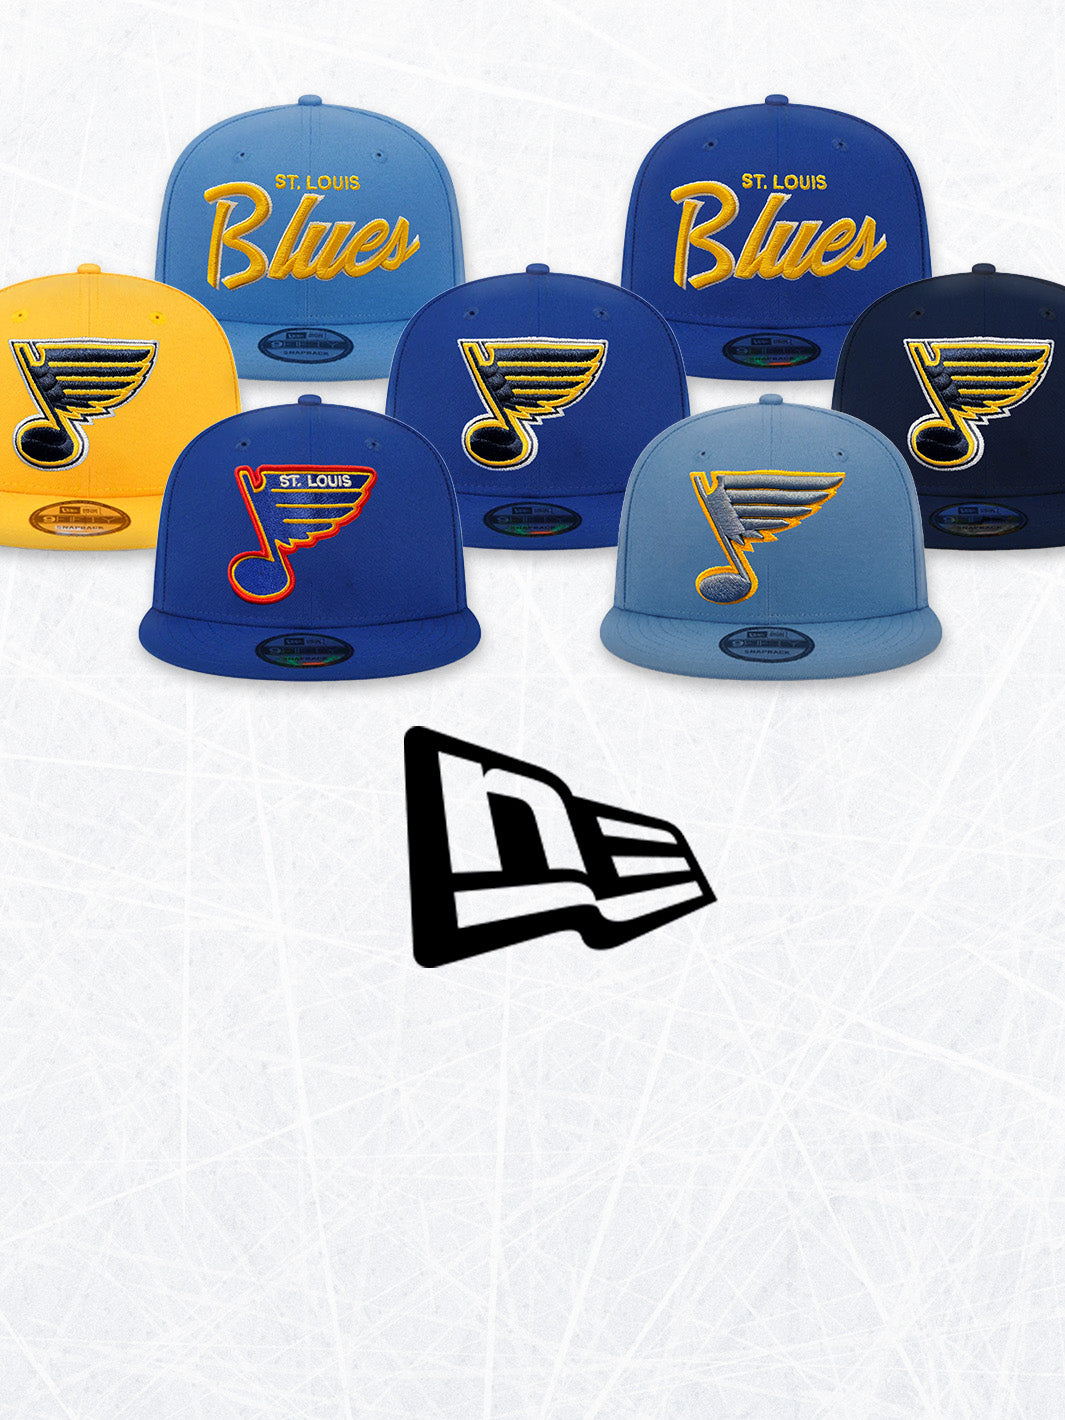 STL Authentics Blues Apparel and Gear